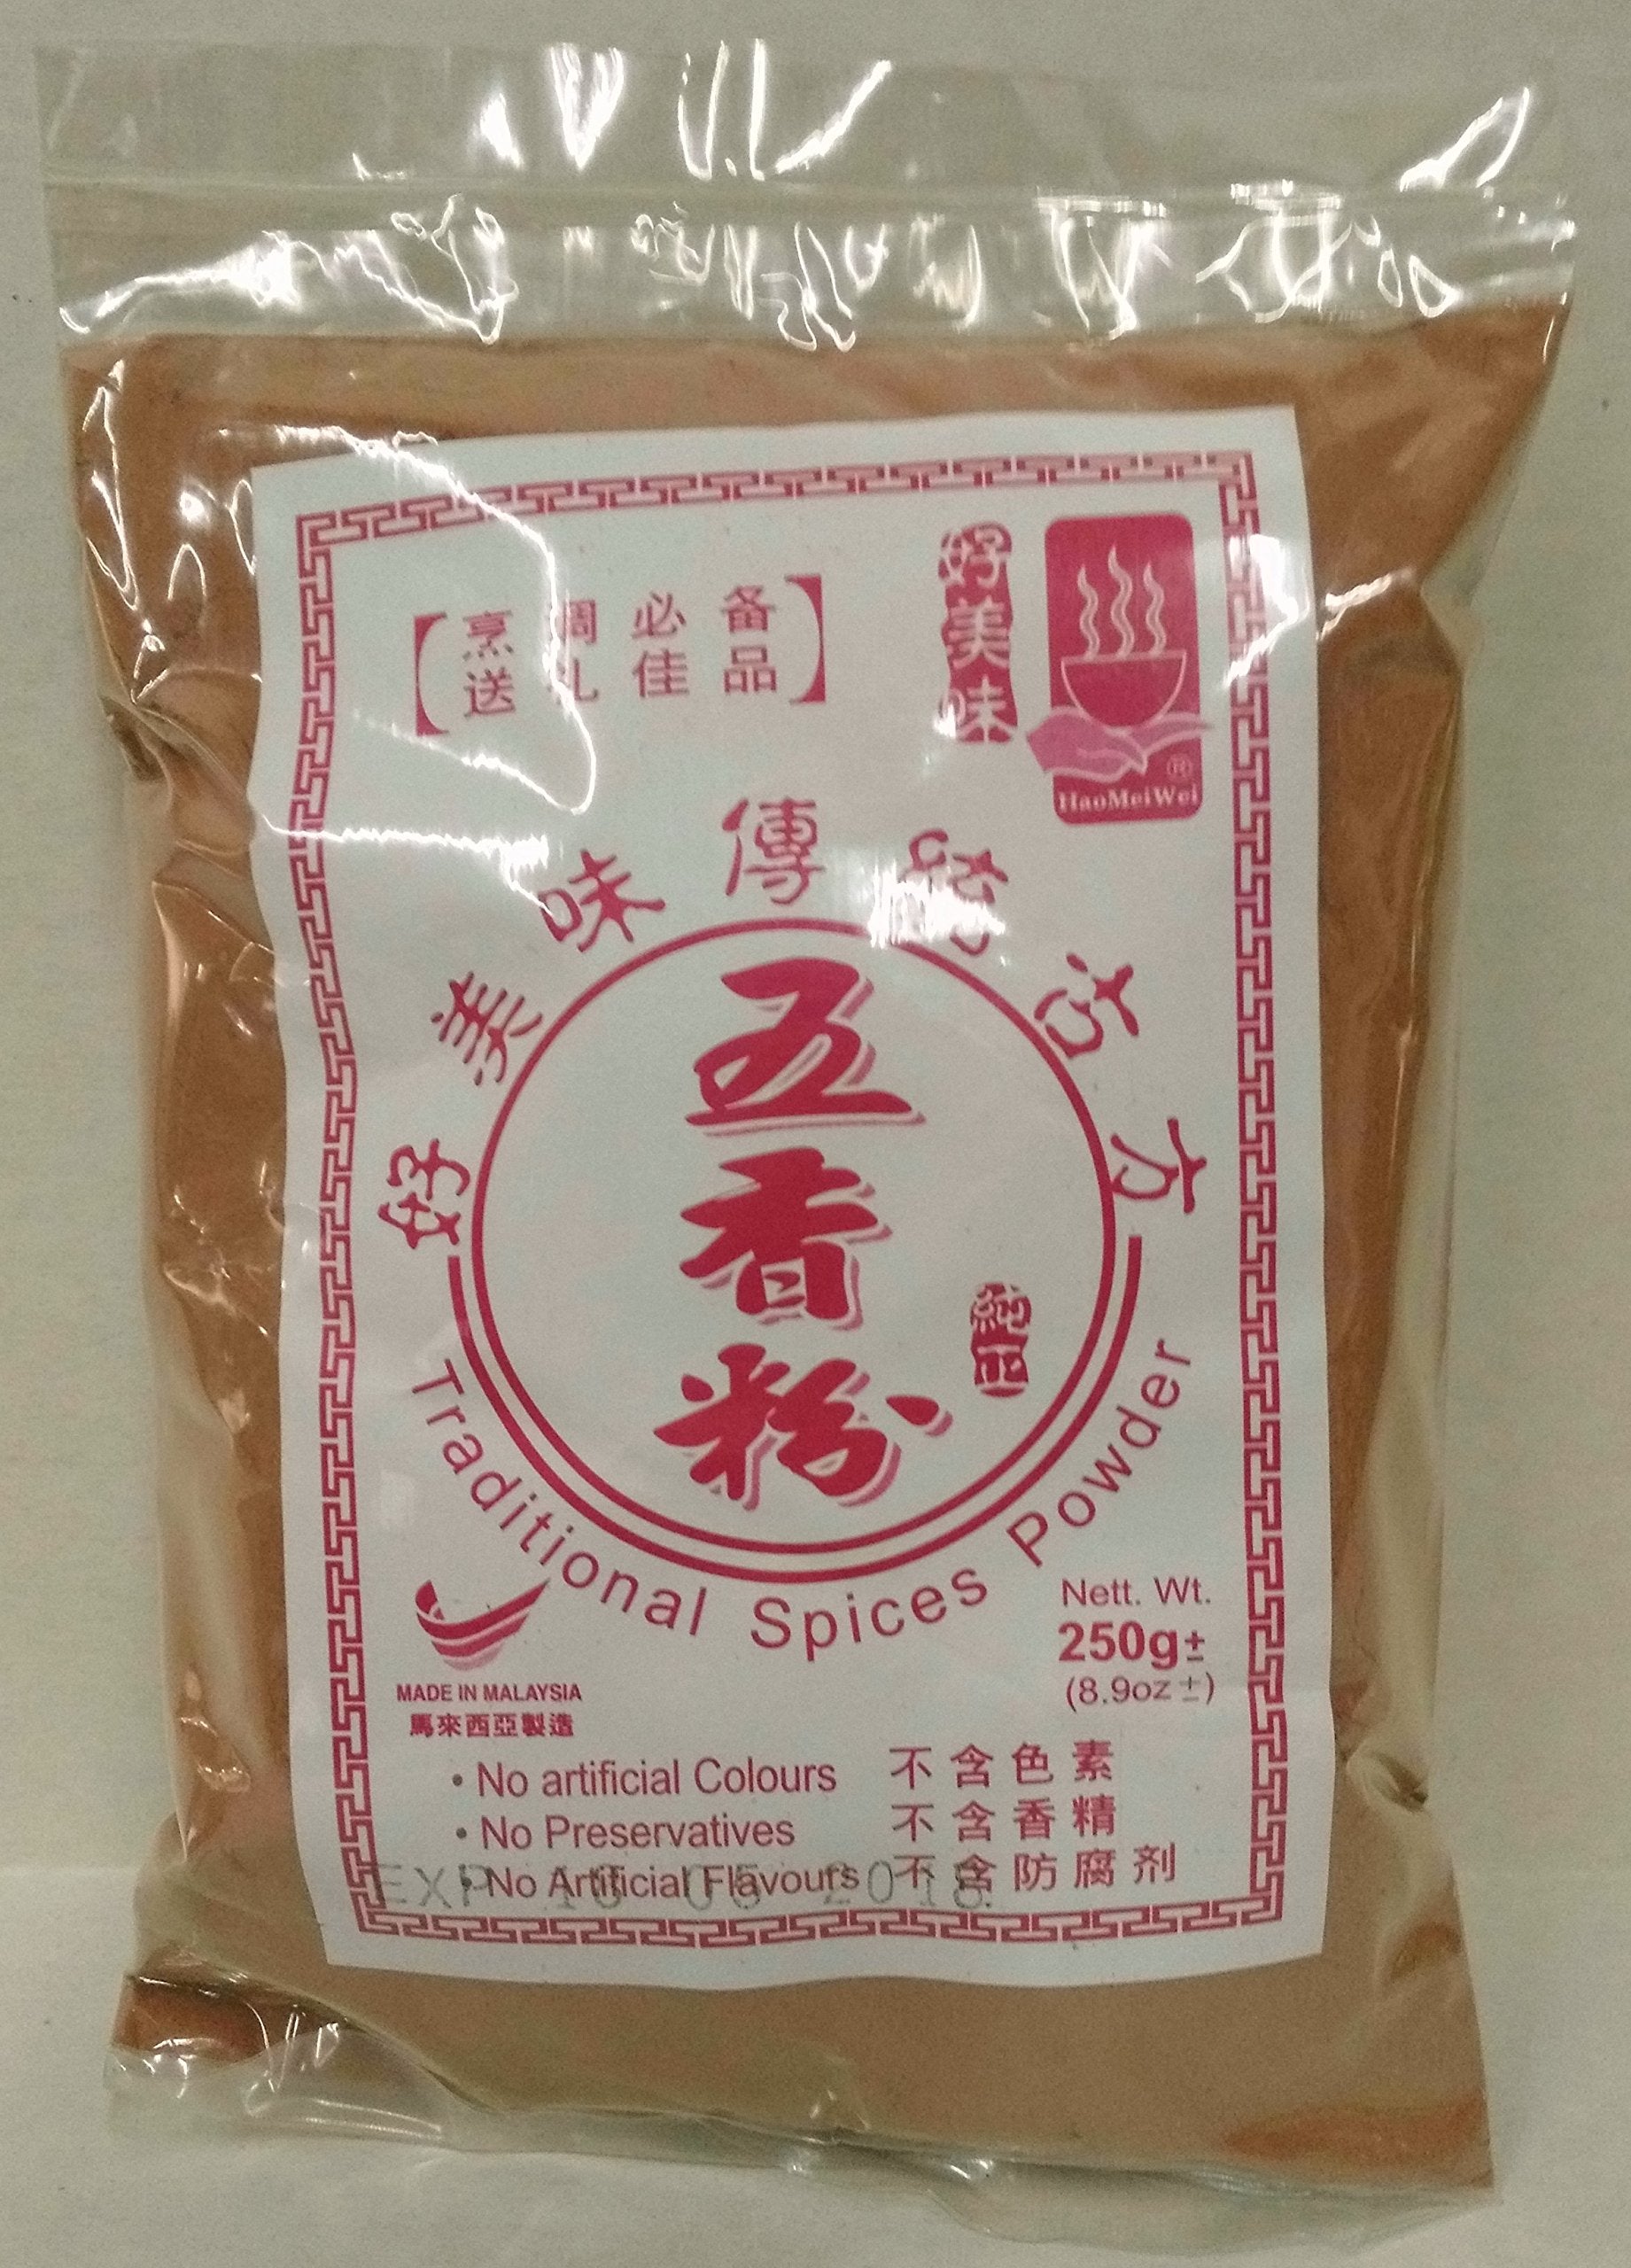 HaoMeiWei Traditional Spices (5 Spices) Powder 250gm